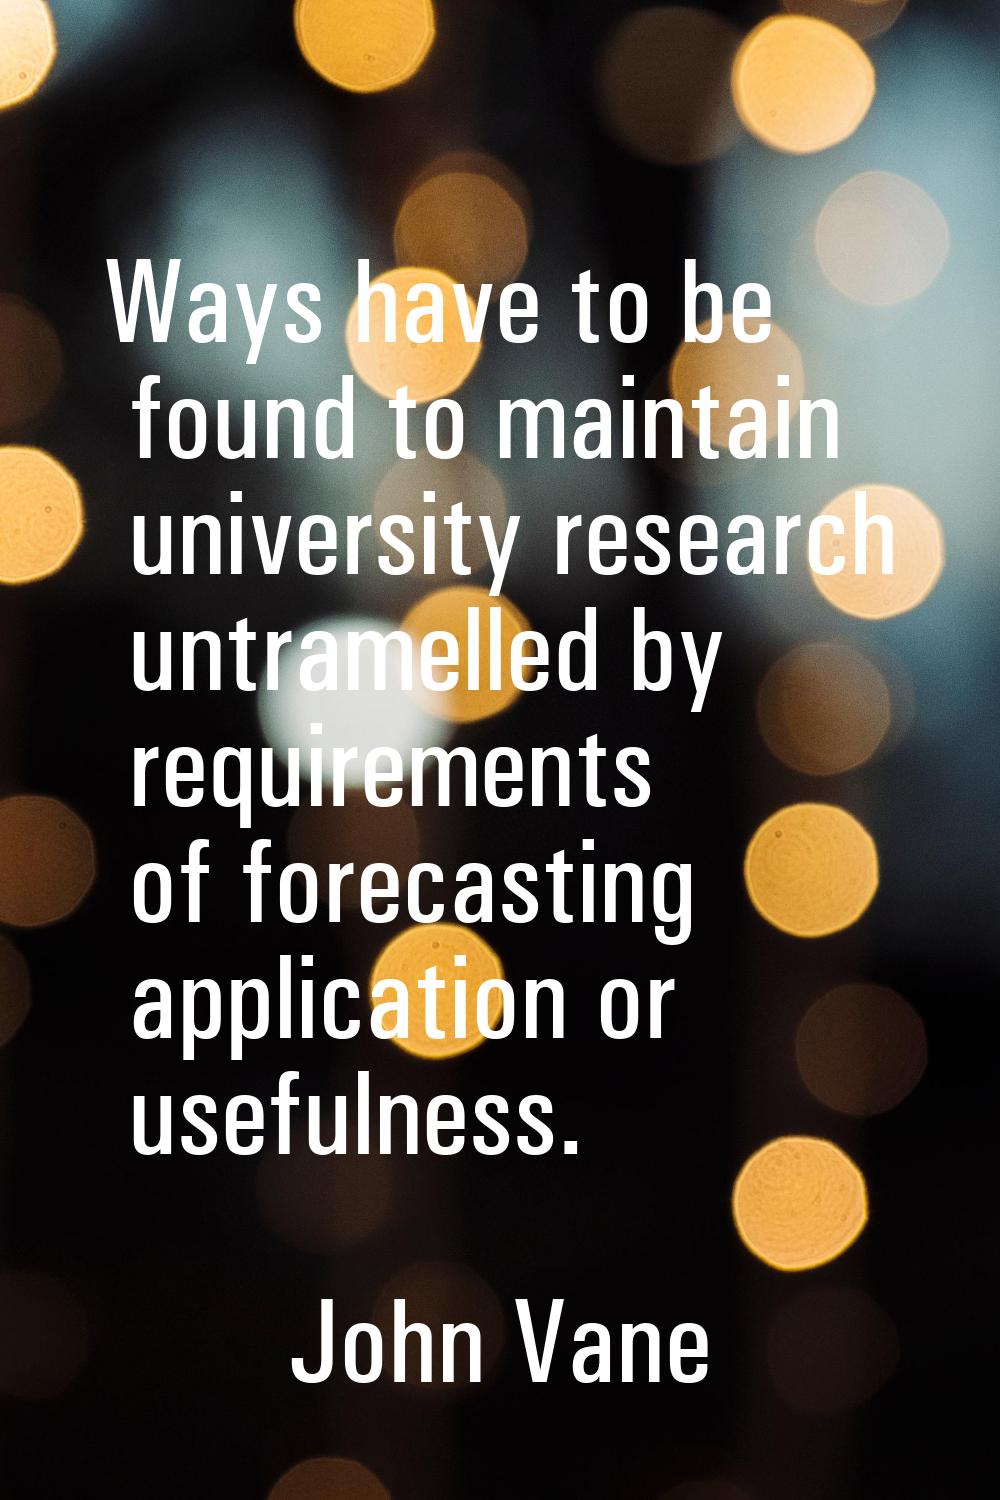 Ways have to be found to maintain university research untramelled by requirements of forecasting ap